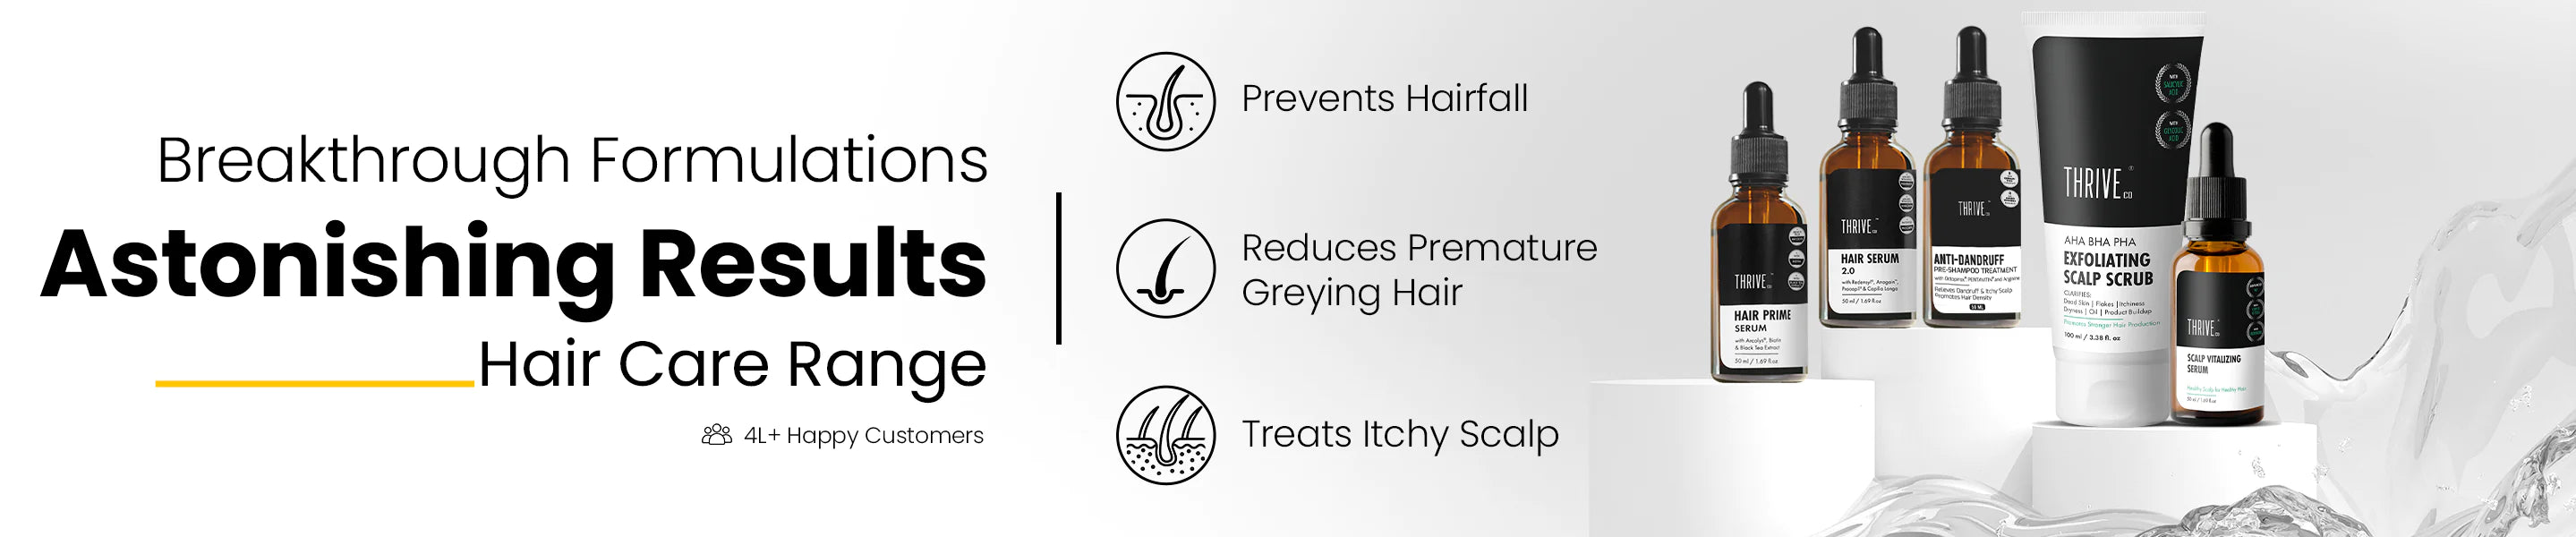 range of hair care products for hairfall, premature grey hair, and itchy scalp